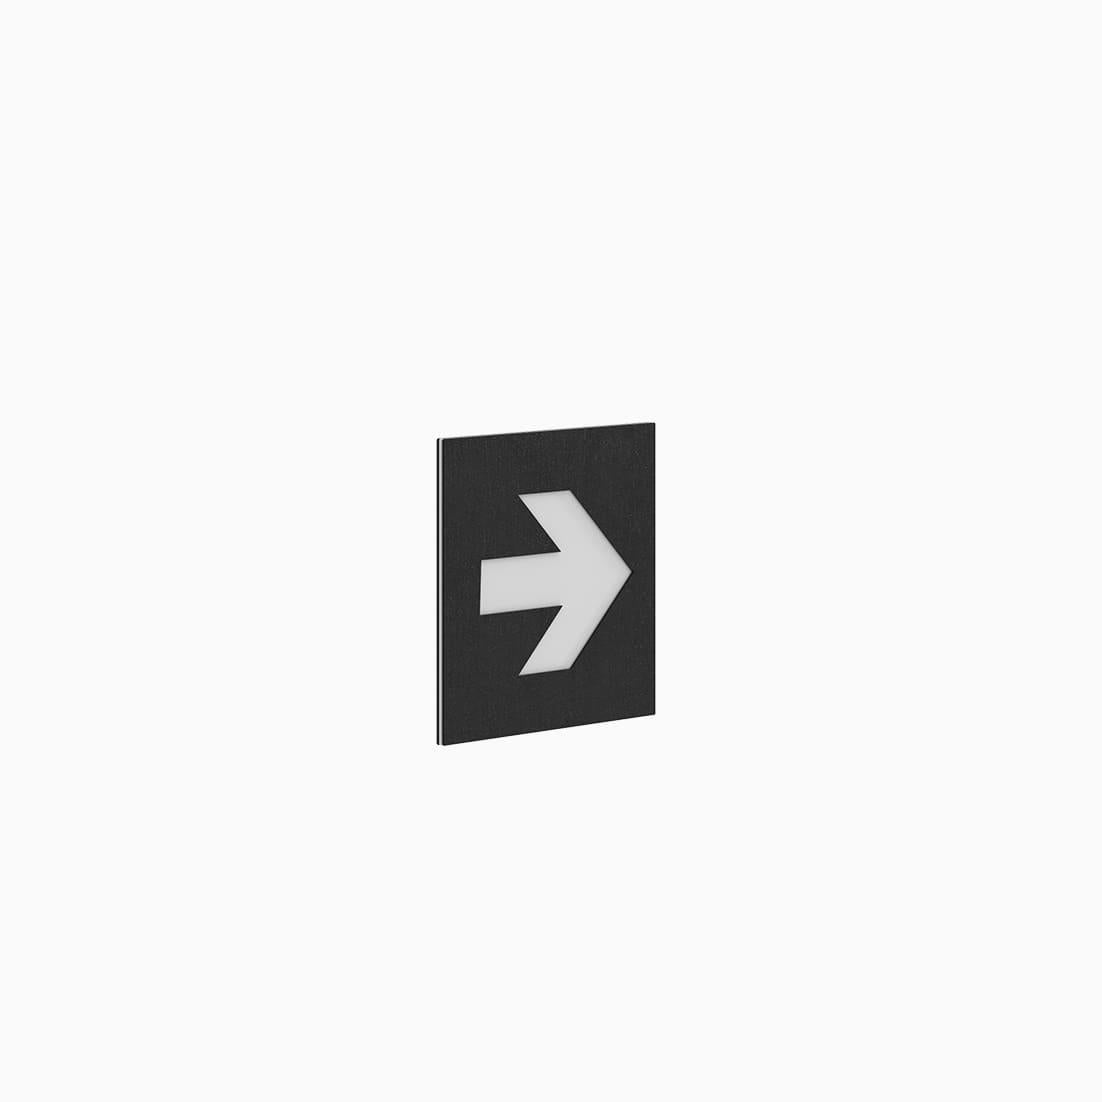 Minimalist Architectural Sign - Arrow / Evacuation route  For Sale